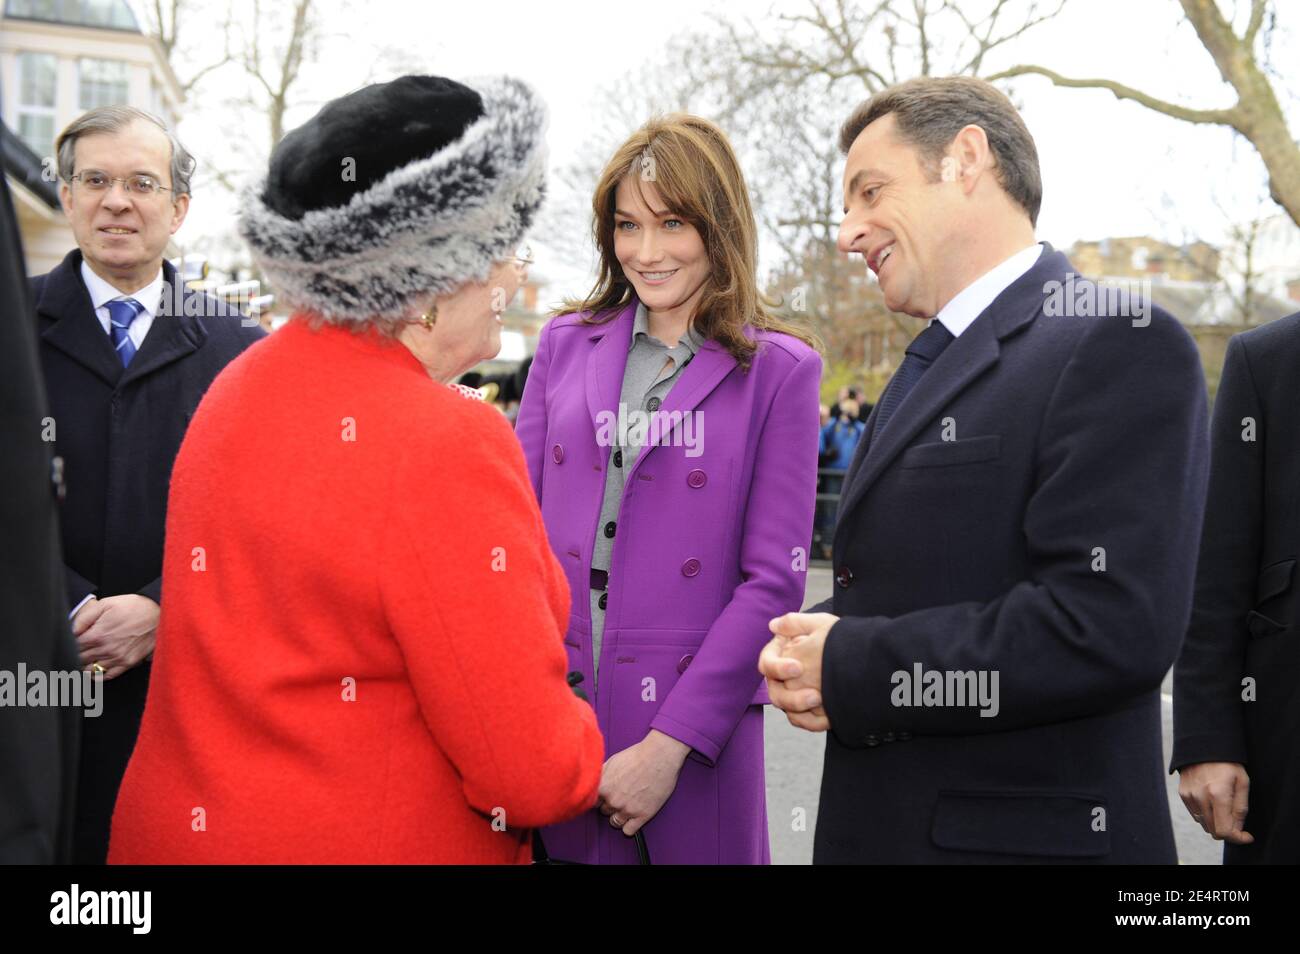 French President Nicolas Sarkozy his wife Carla Bruni-Sarkozy and Sir Winston Churchill daughter Lady Soames attend the laying of a wreath at the Statue of Charles De Gaulle, in London, England on March 27, 2008. Photo by Christophe Guibbaud/ABACAPRESS.COM Stock Photo